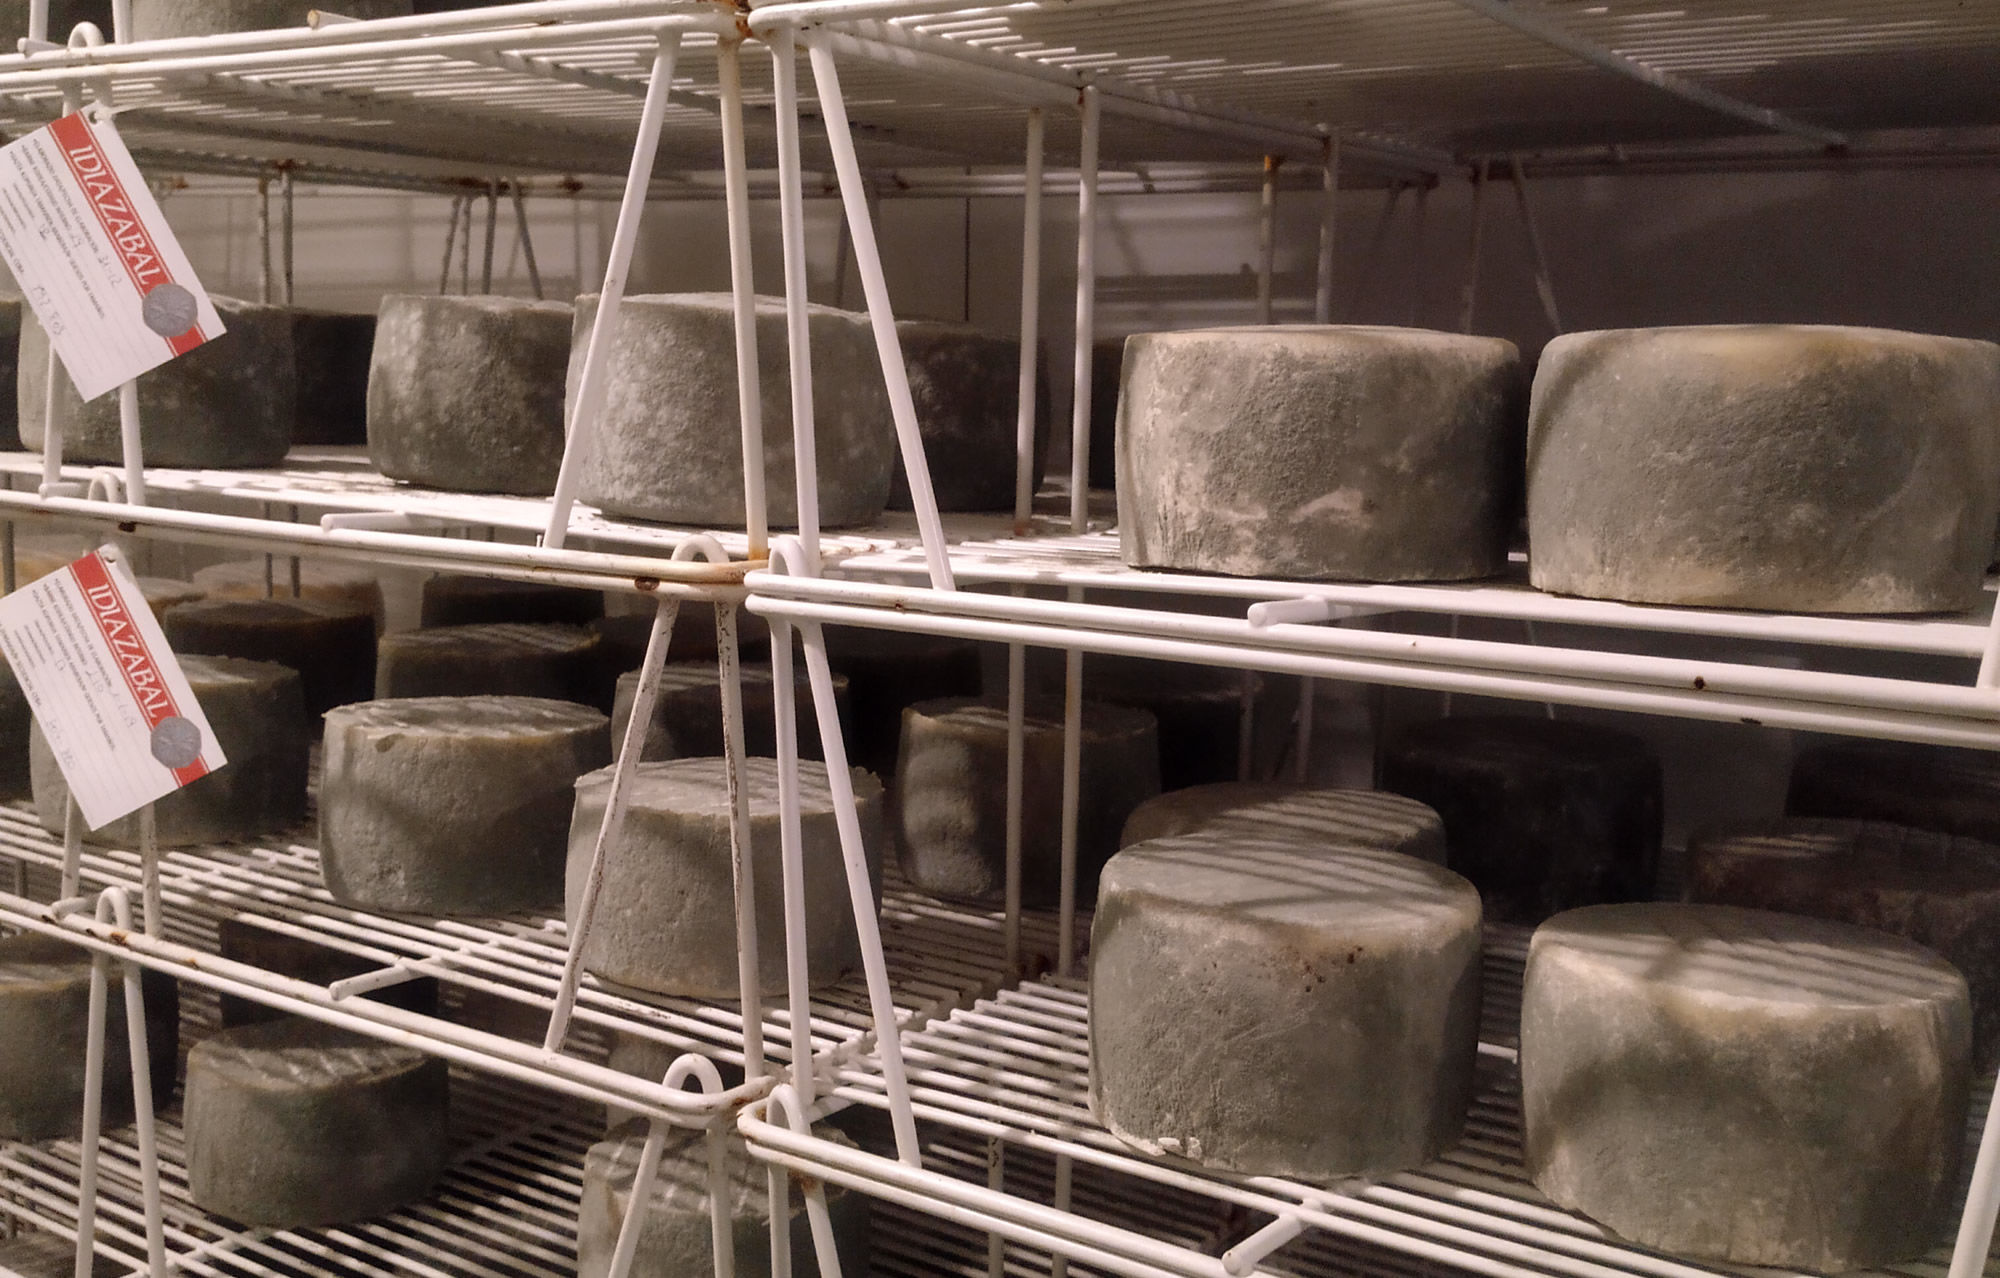 Learn how cheese is traditionally made; at our dairy we will teach you how we make different varieties of cheese